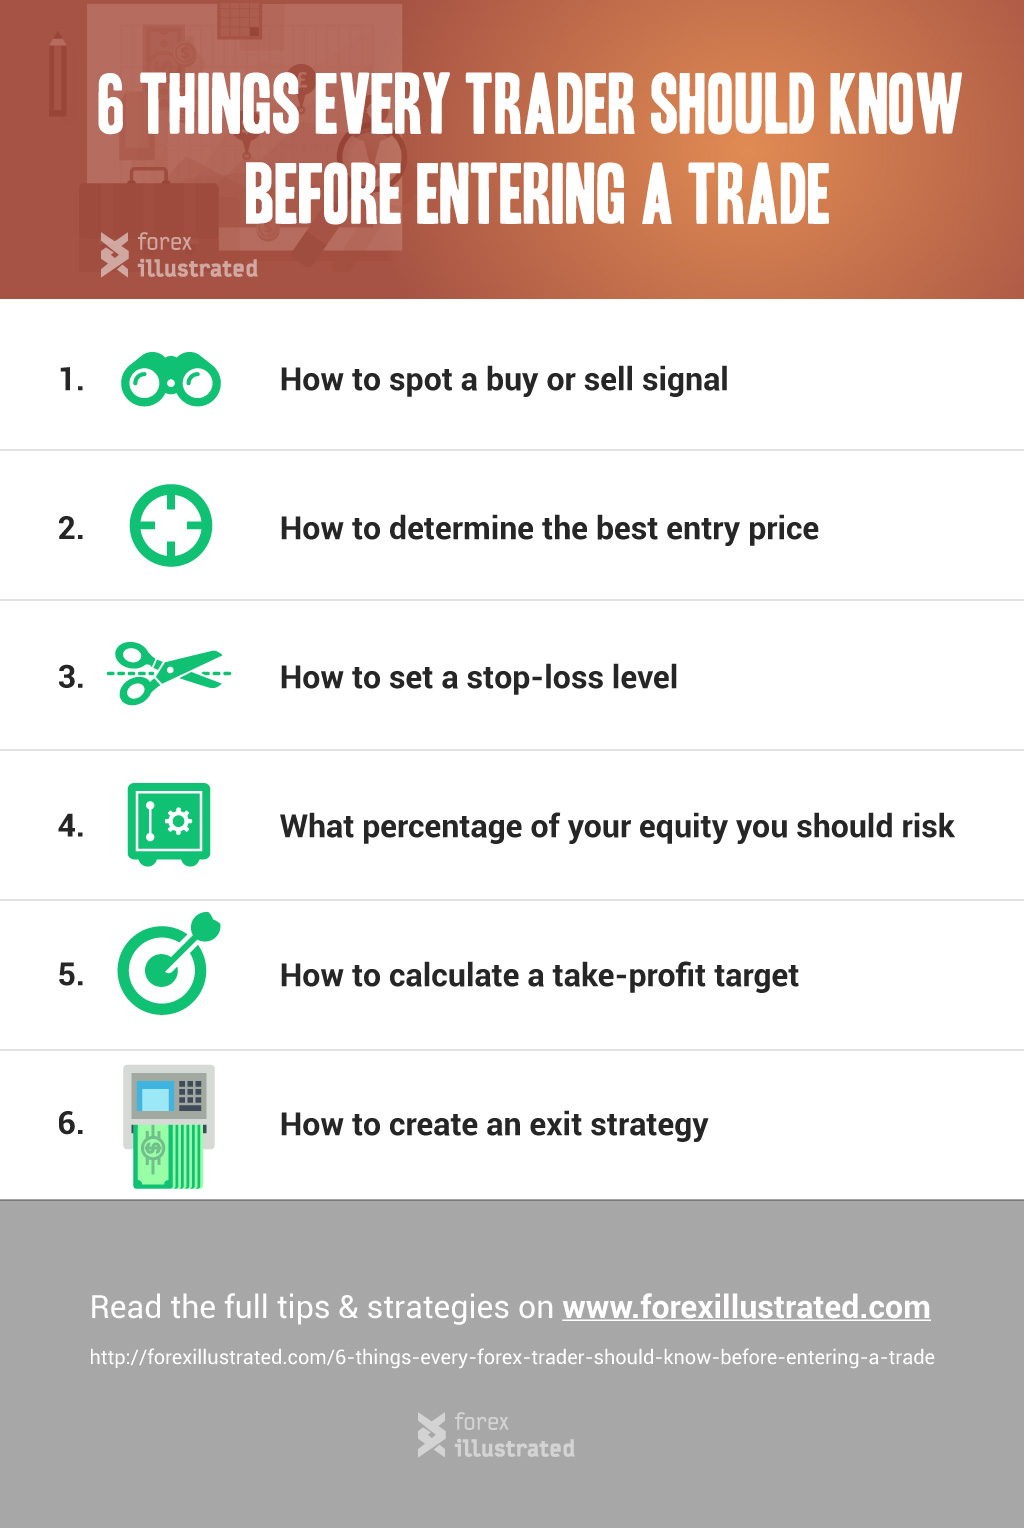 six-things-every-forex-stock-trader-must-know-how-to-spot-buy-sell-signal-how-to-determine-buy-sell-signal-set-up-stop-loss-level-what-percentage-of-equity-calculate-take-profit-target-create-exit-strategy